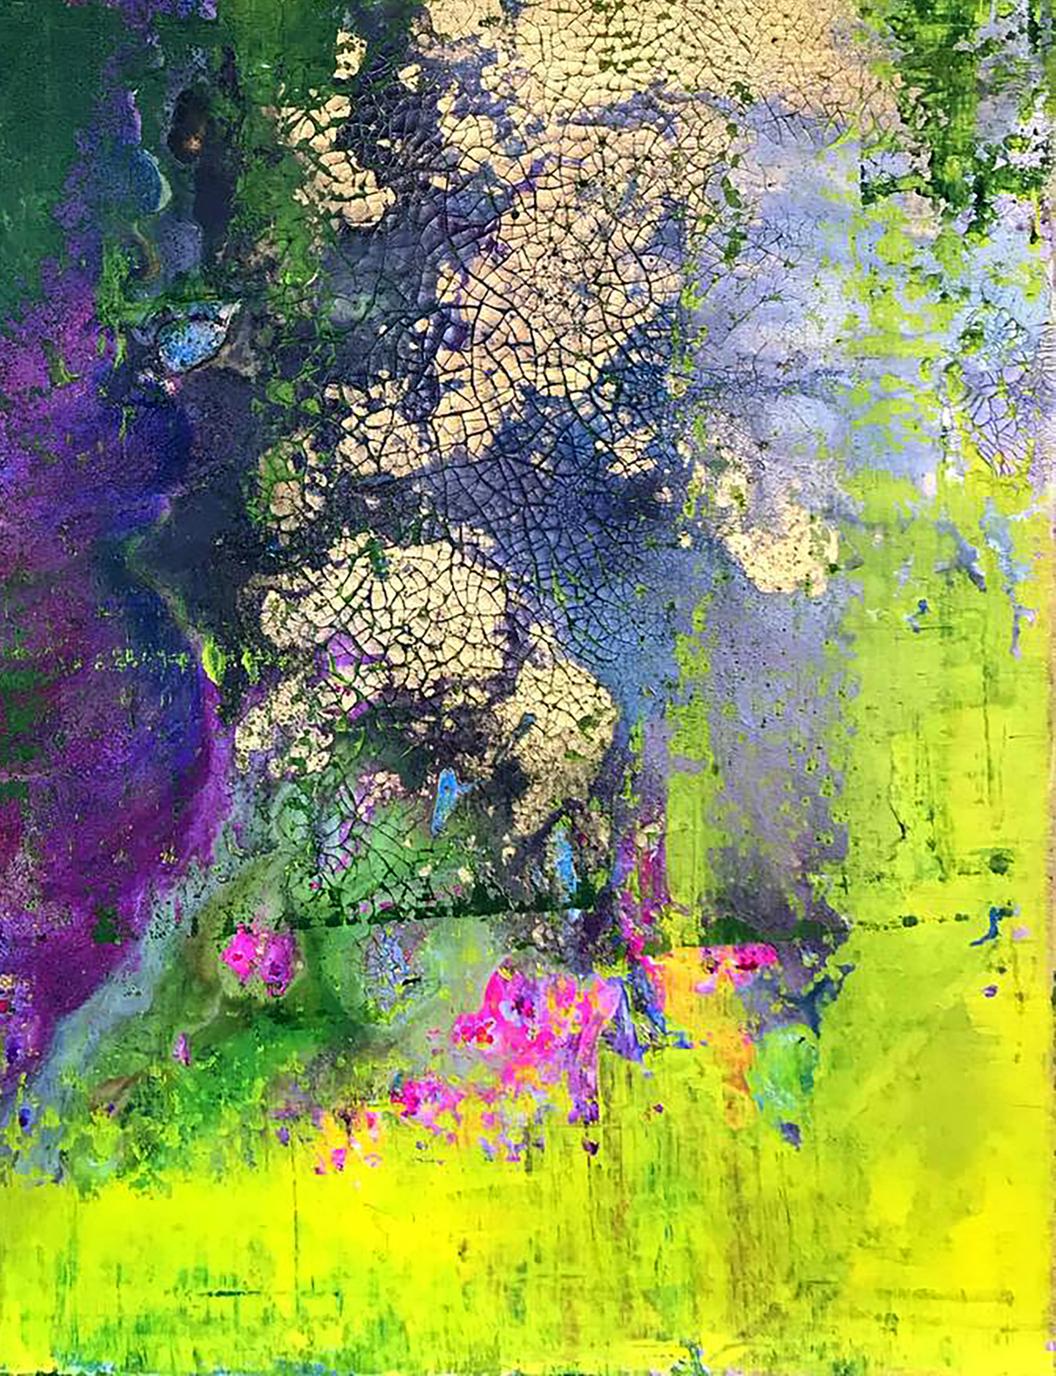 In Olga Melezhik's acrylic painting, a garden of lilacs is featured